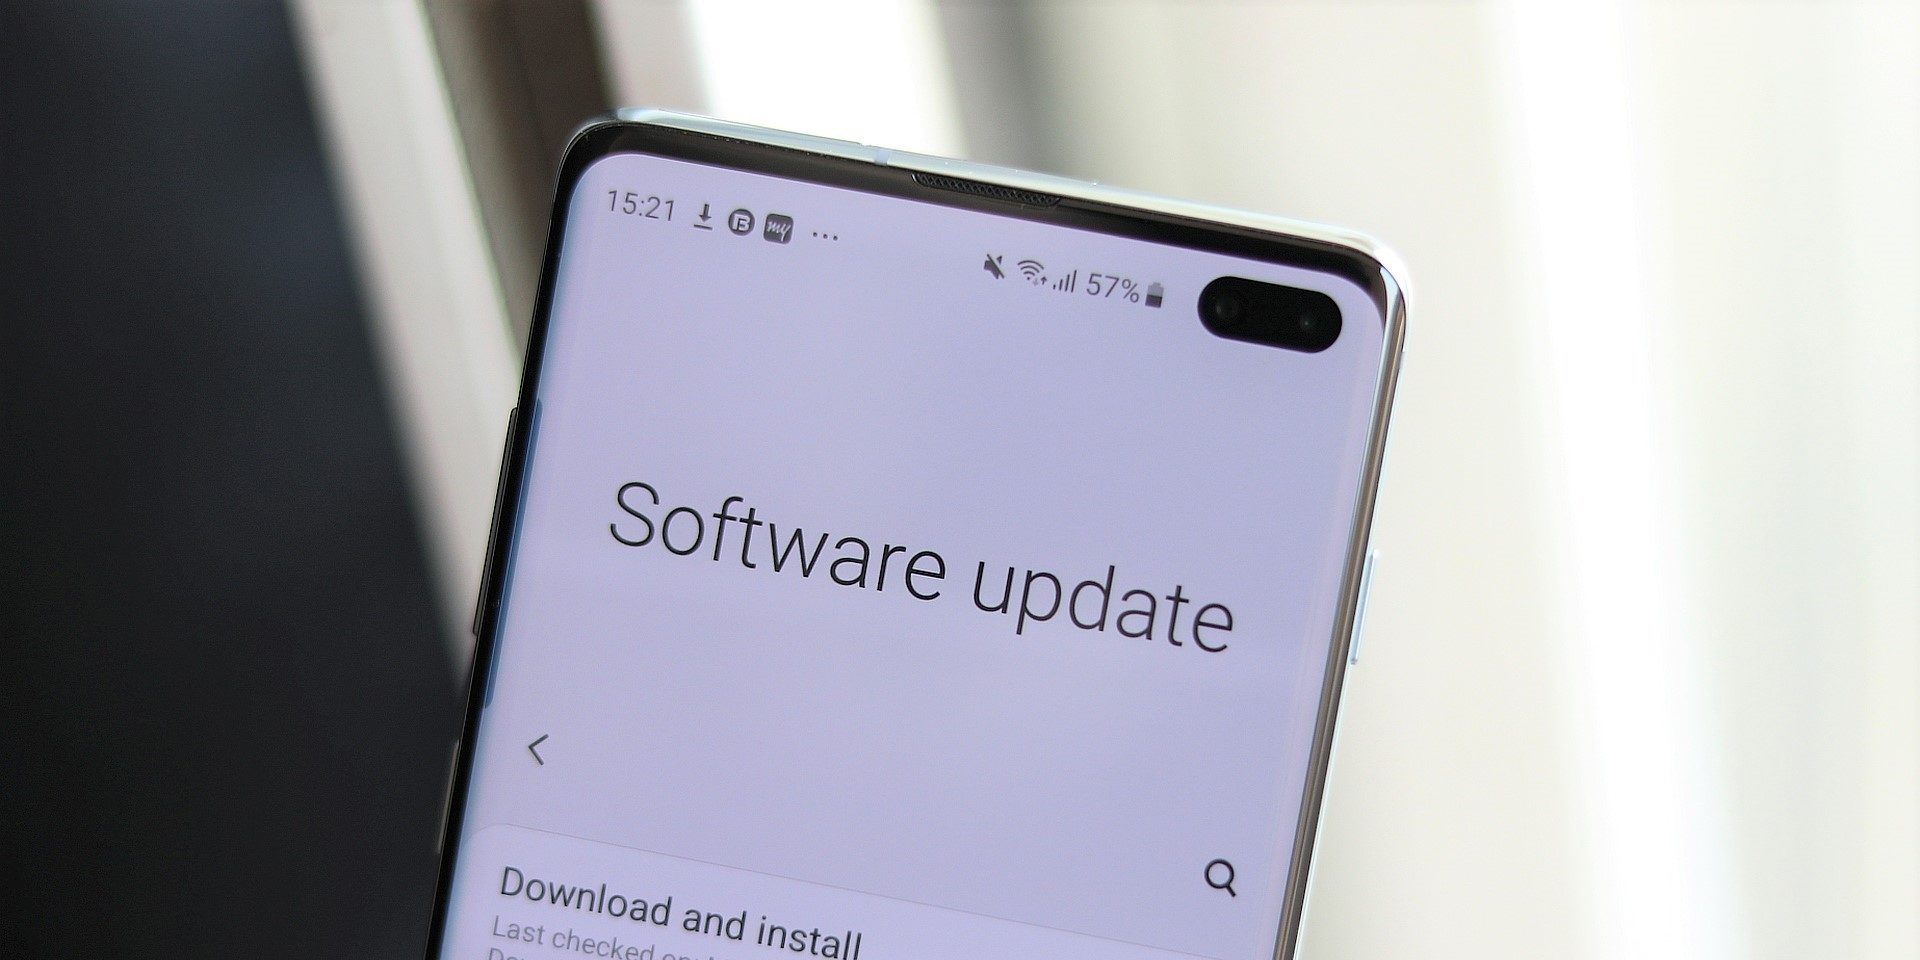 Samsung Galaxy S10 Android update issues bugs